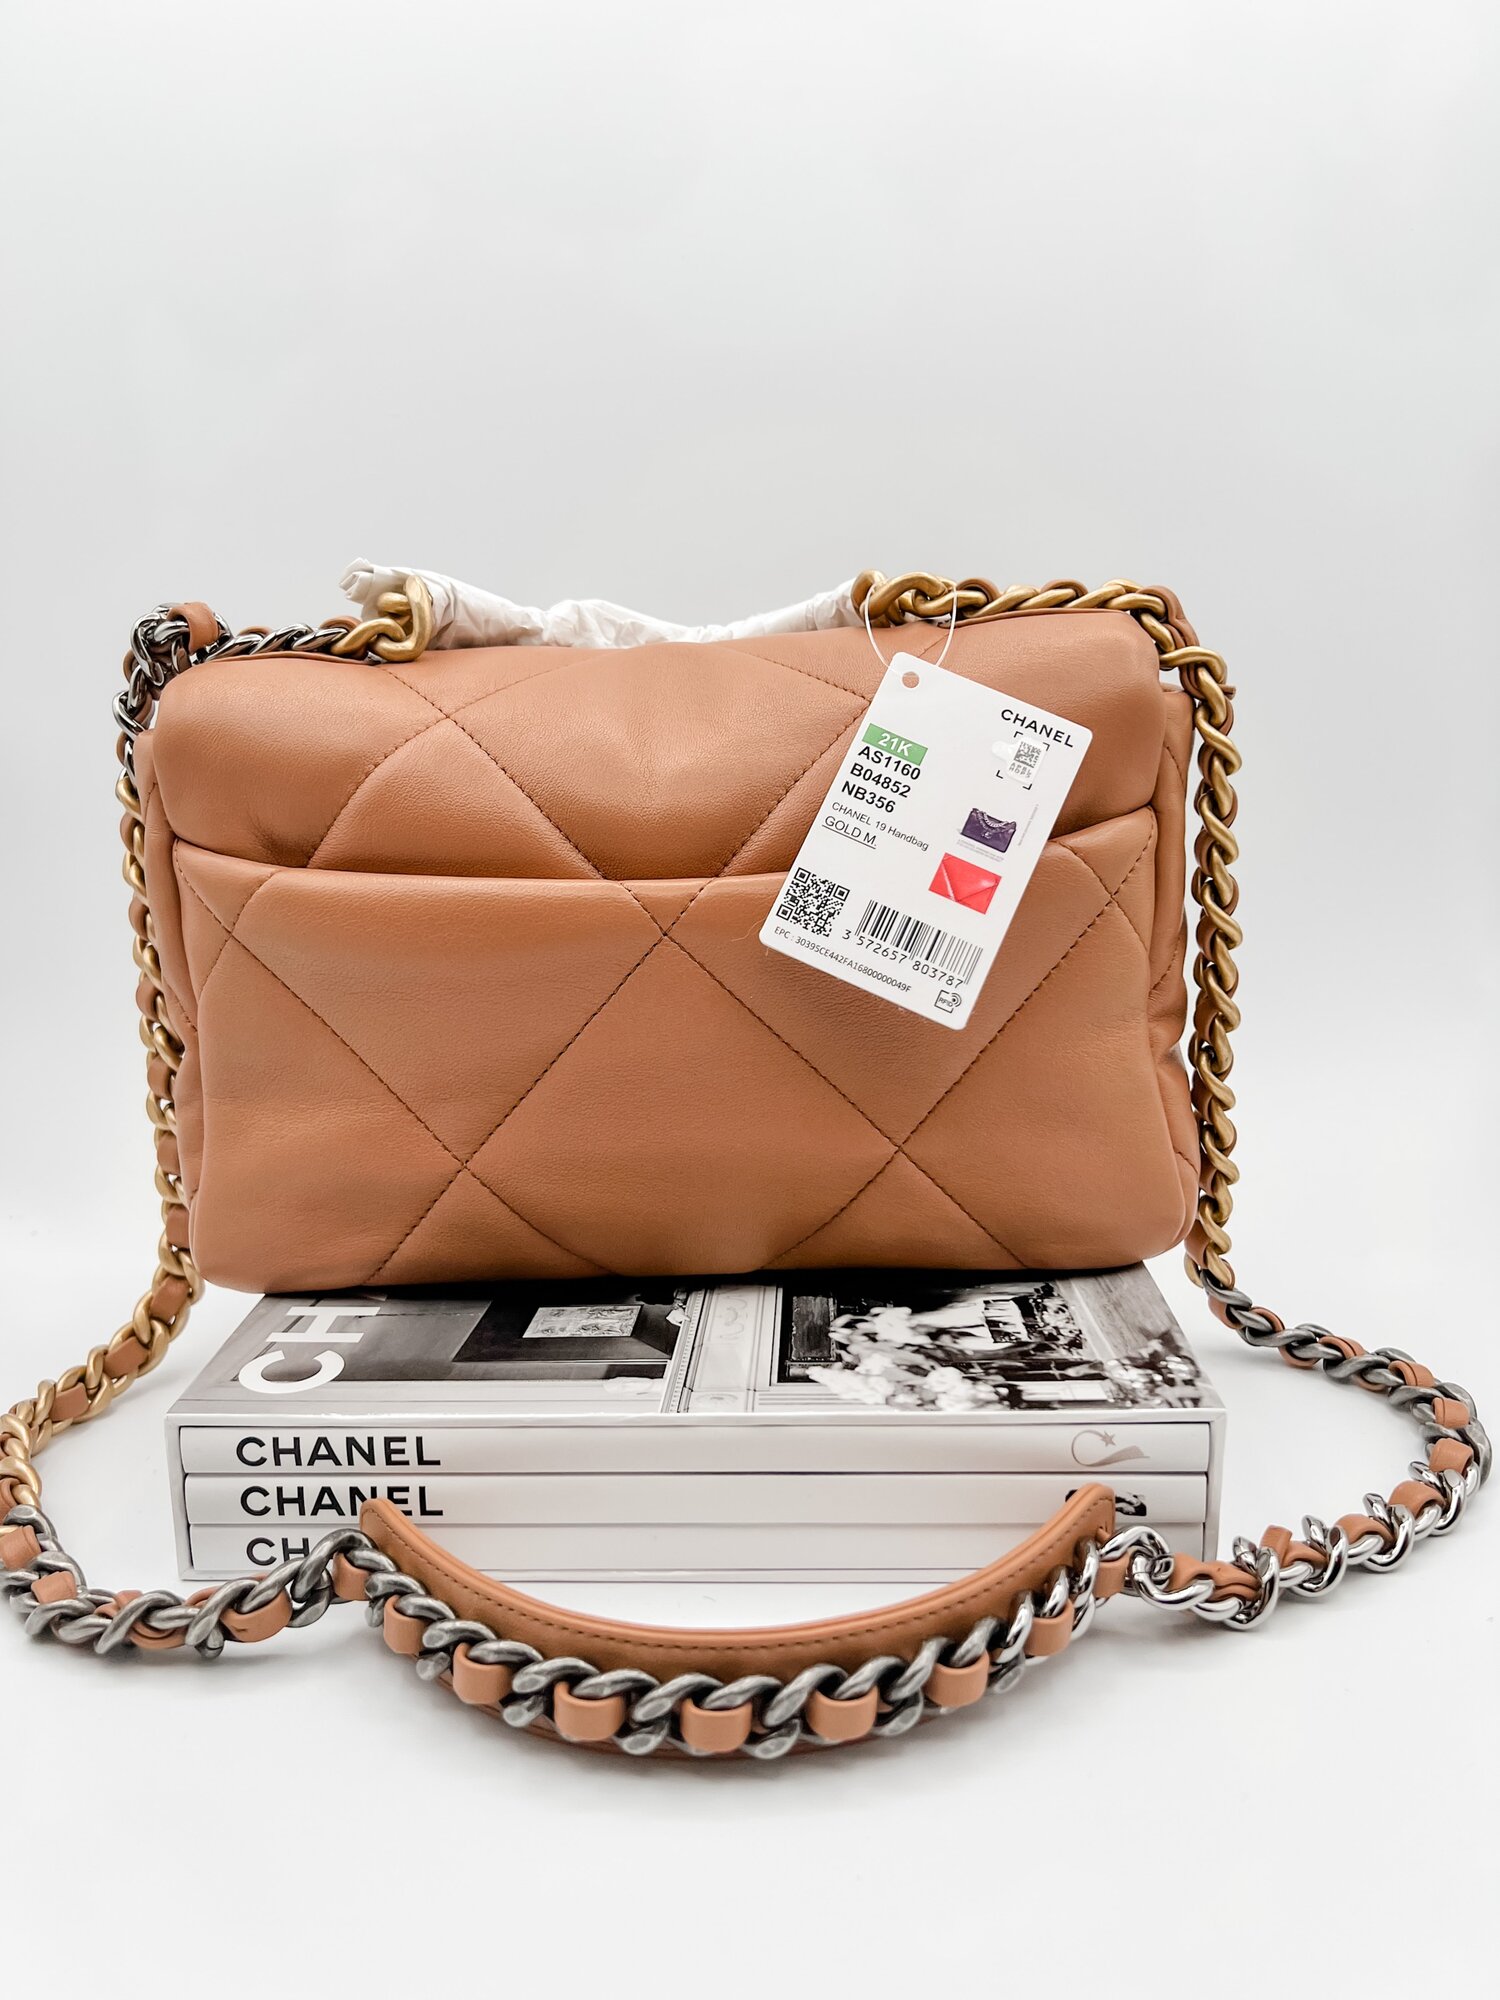 Chanel 19 Caramel in Small — St Galentine